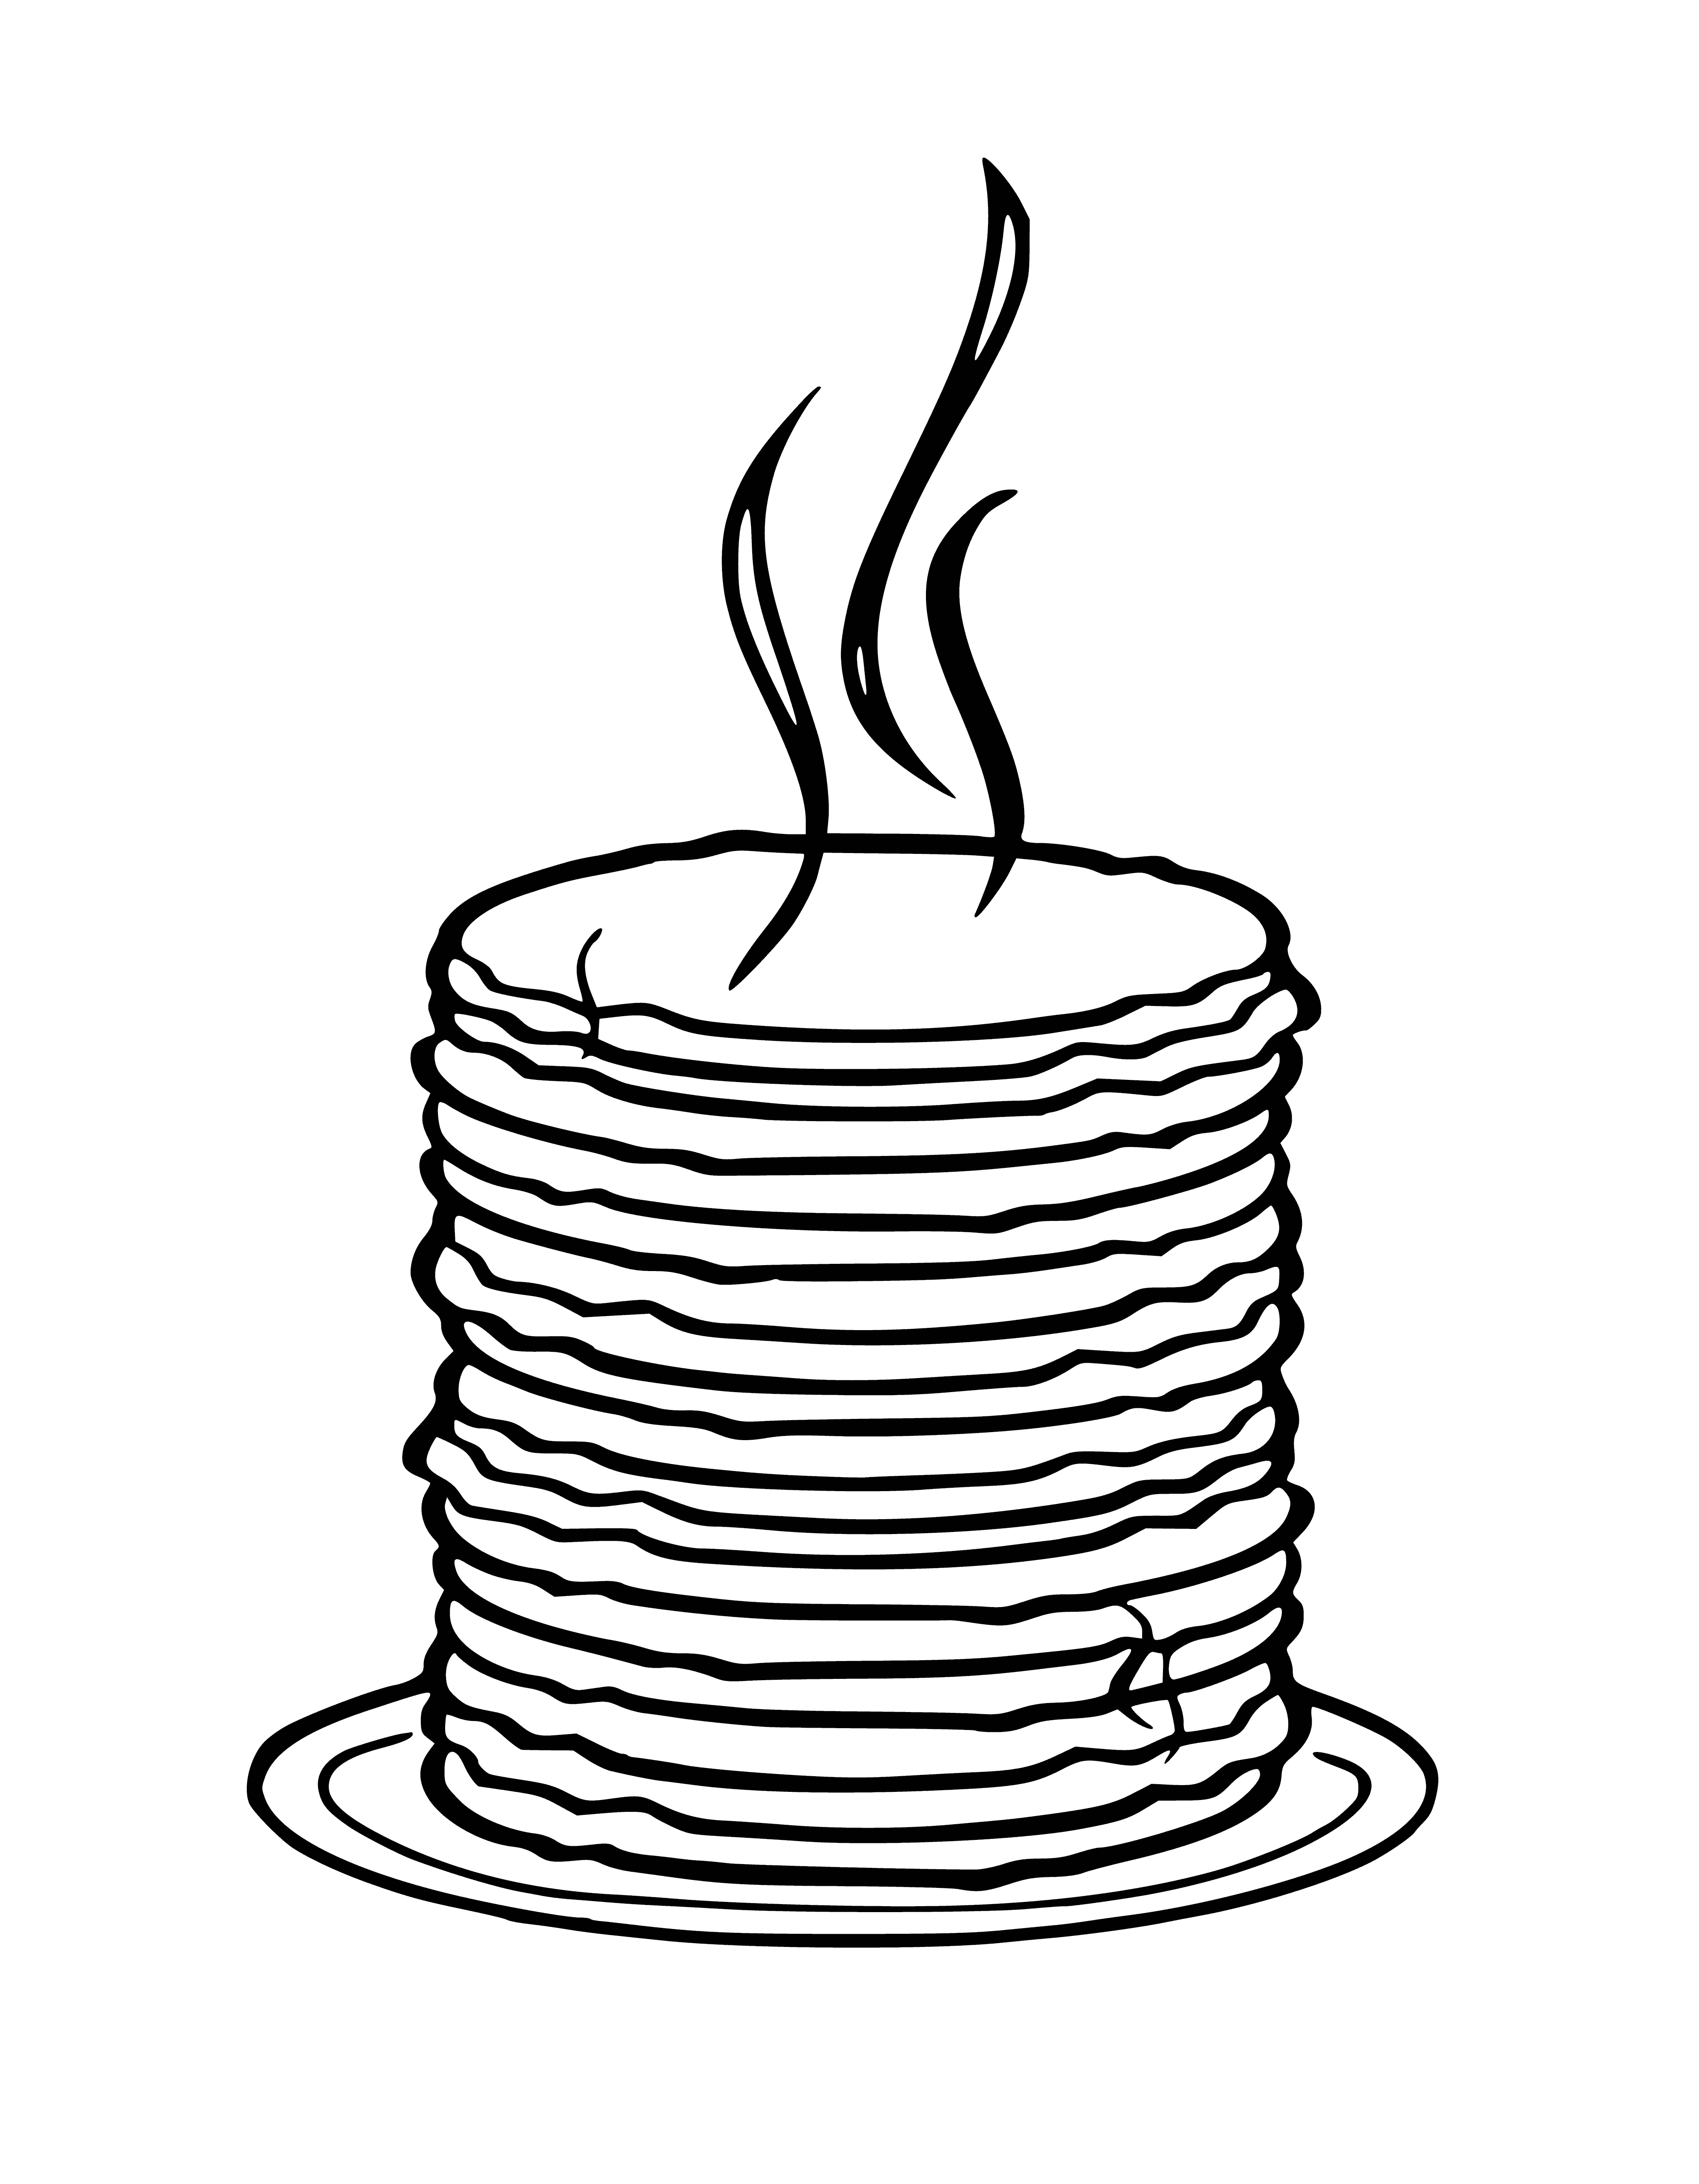 coloring page: Tradition to eat pancakes on Pancake day; light brown, green (spinach) & blue (blueberry) ones. Enjoy as many as you can!